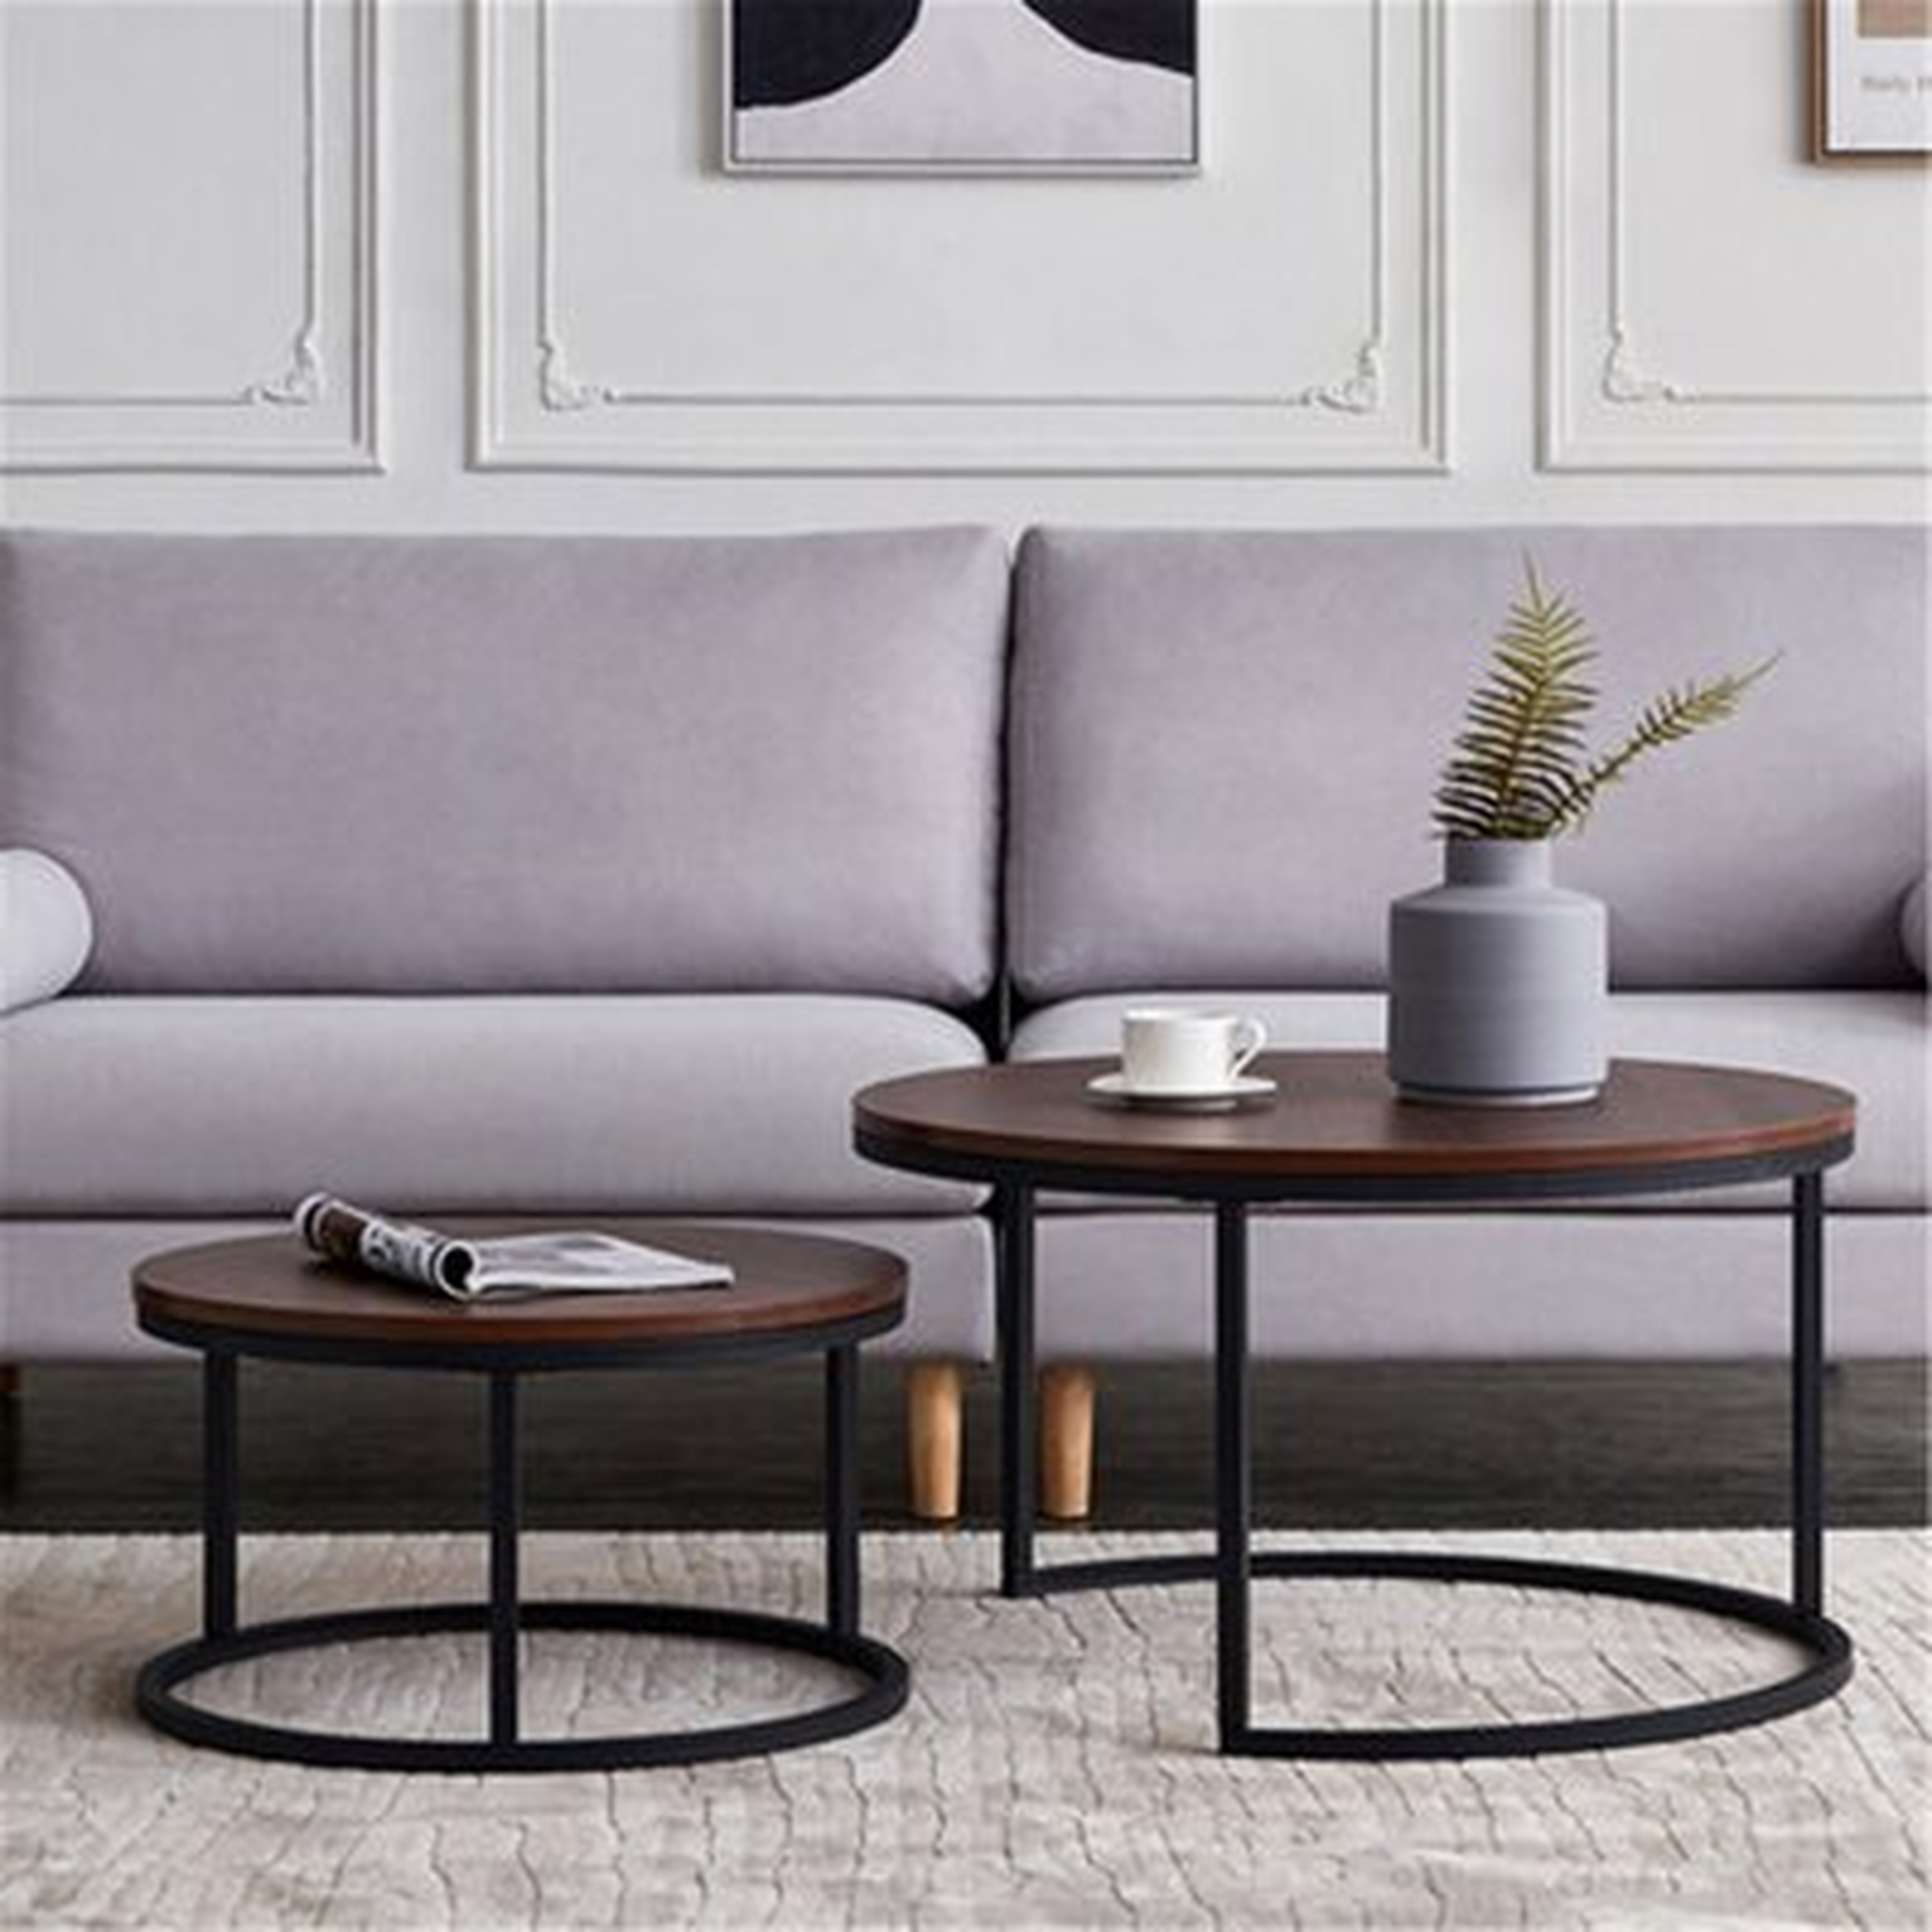 31.5" Modern Nesting Coffee Table Round,Golden Color Frame With Marble Pattern Wood - Wayfair